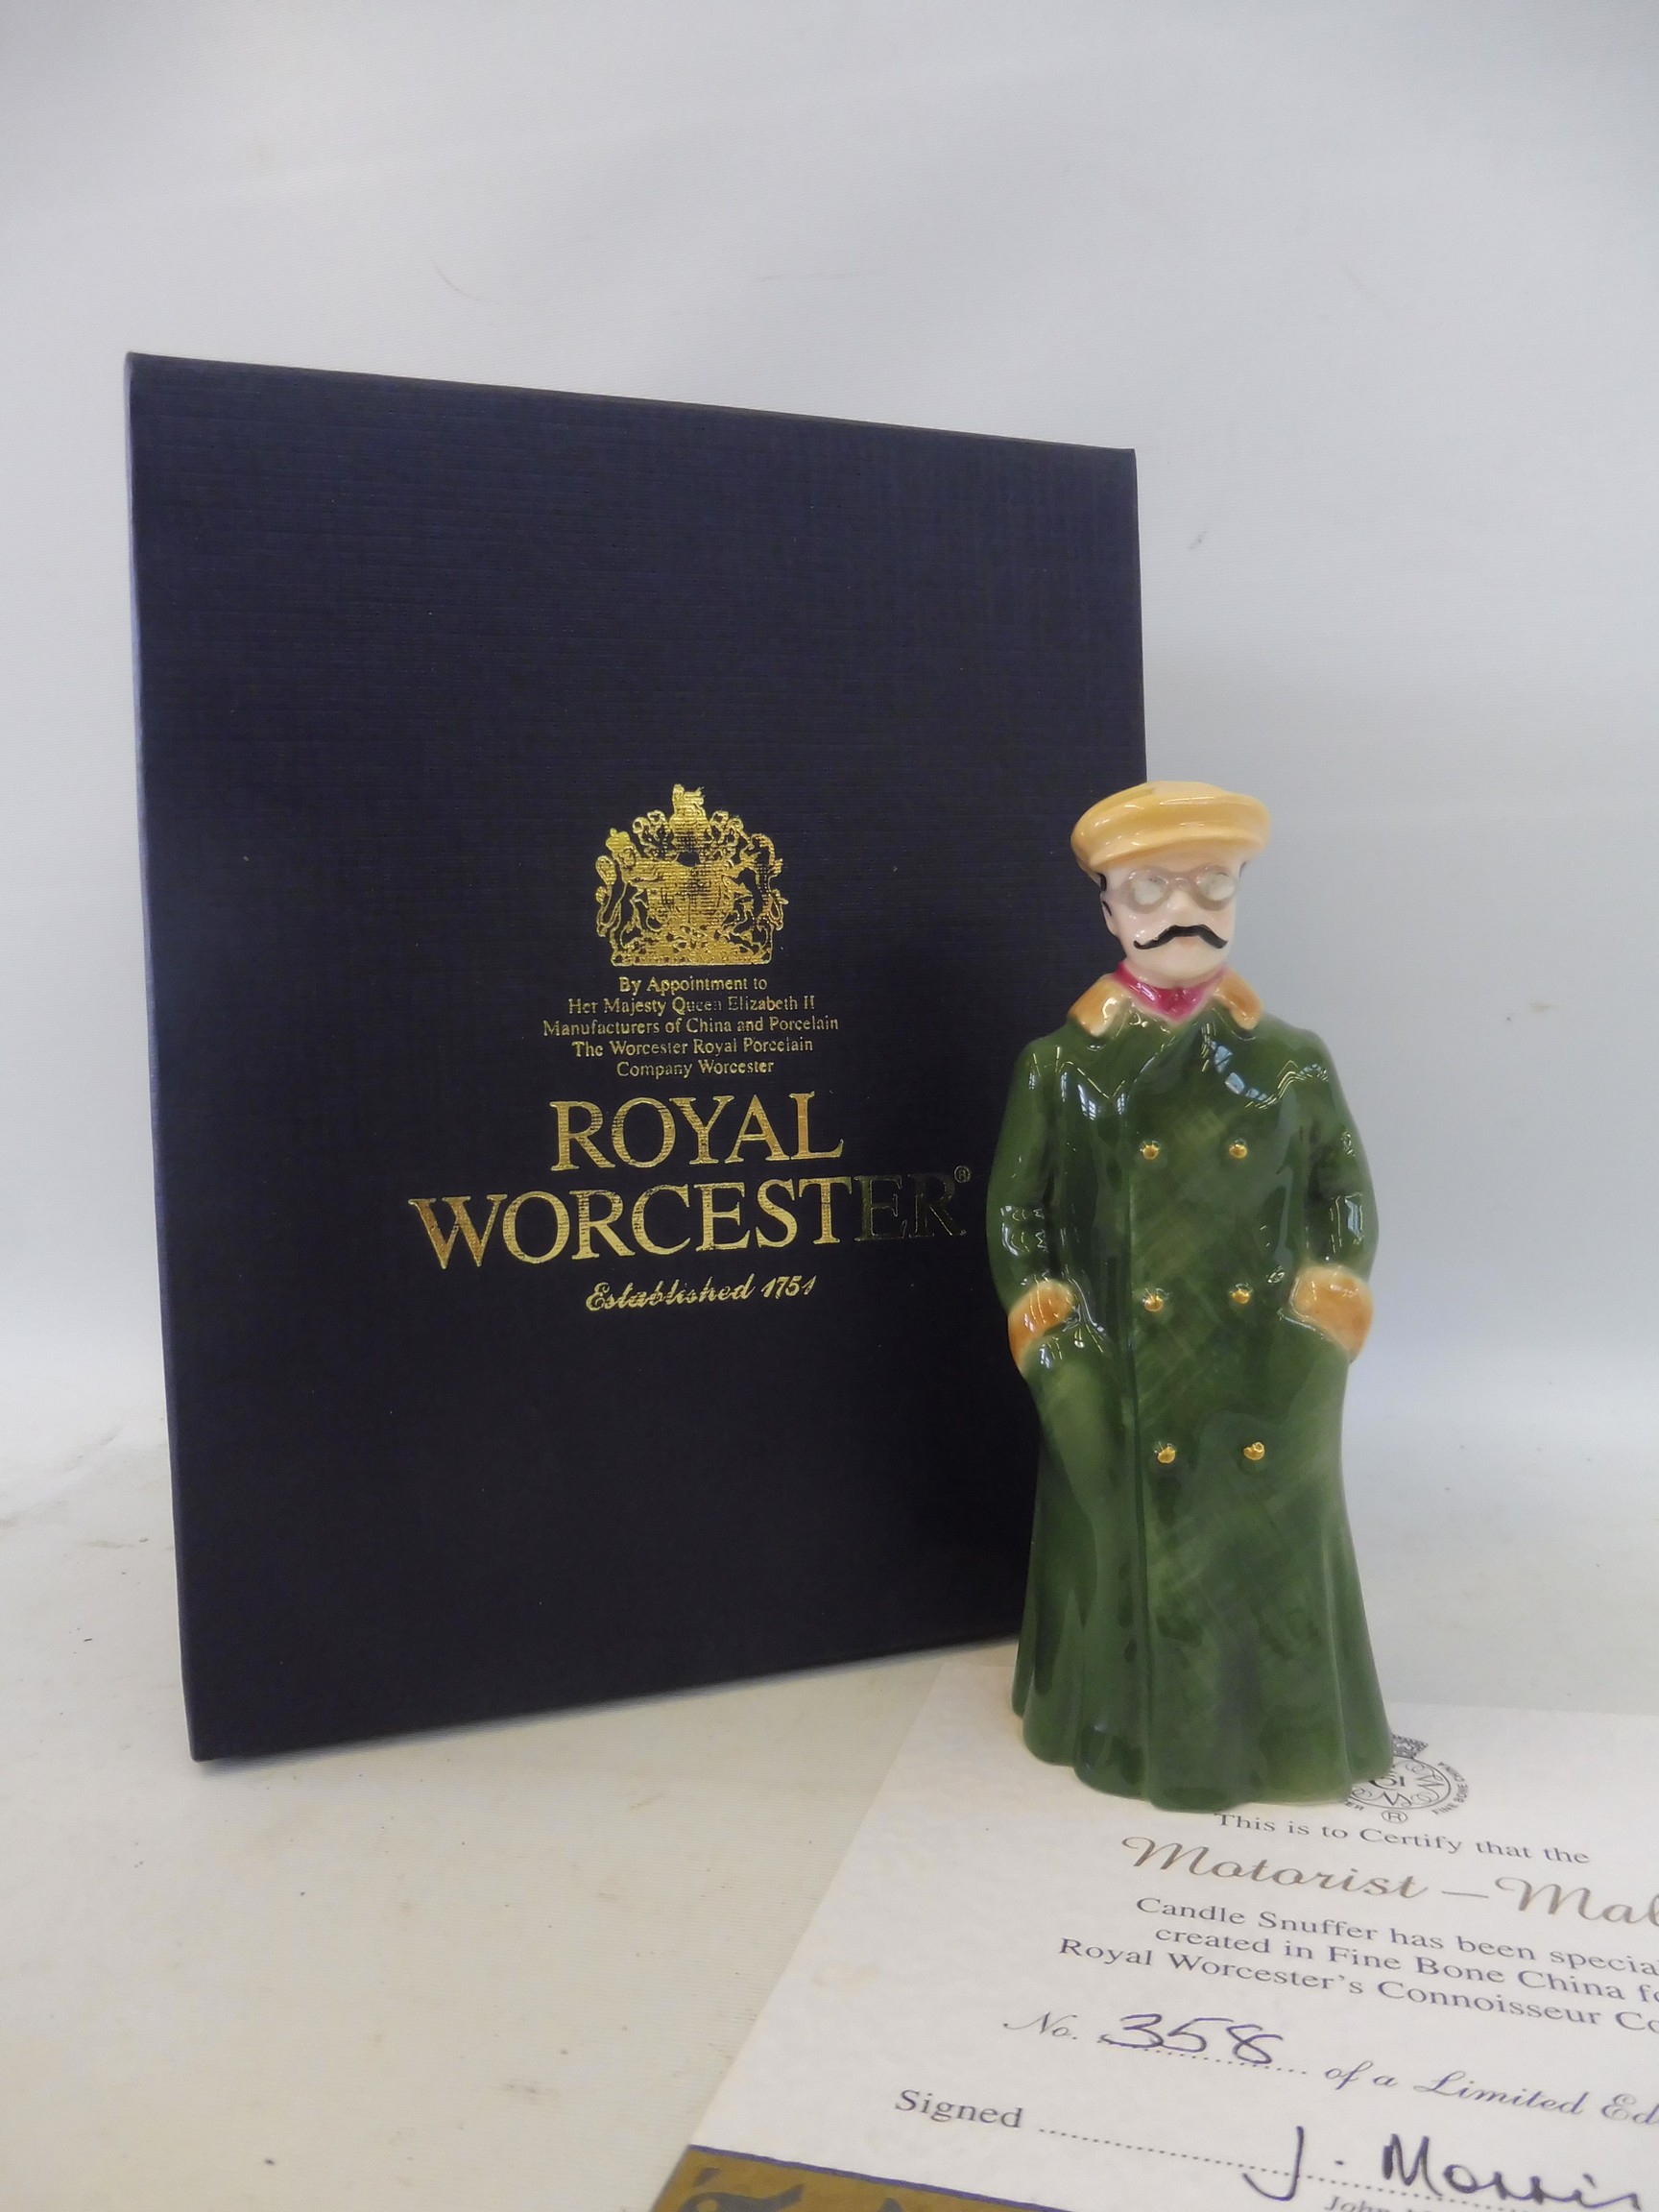 A boxed limited edition Royal Worcester porcelain figure of an Edwardian gentleman motorist candle